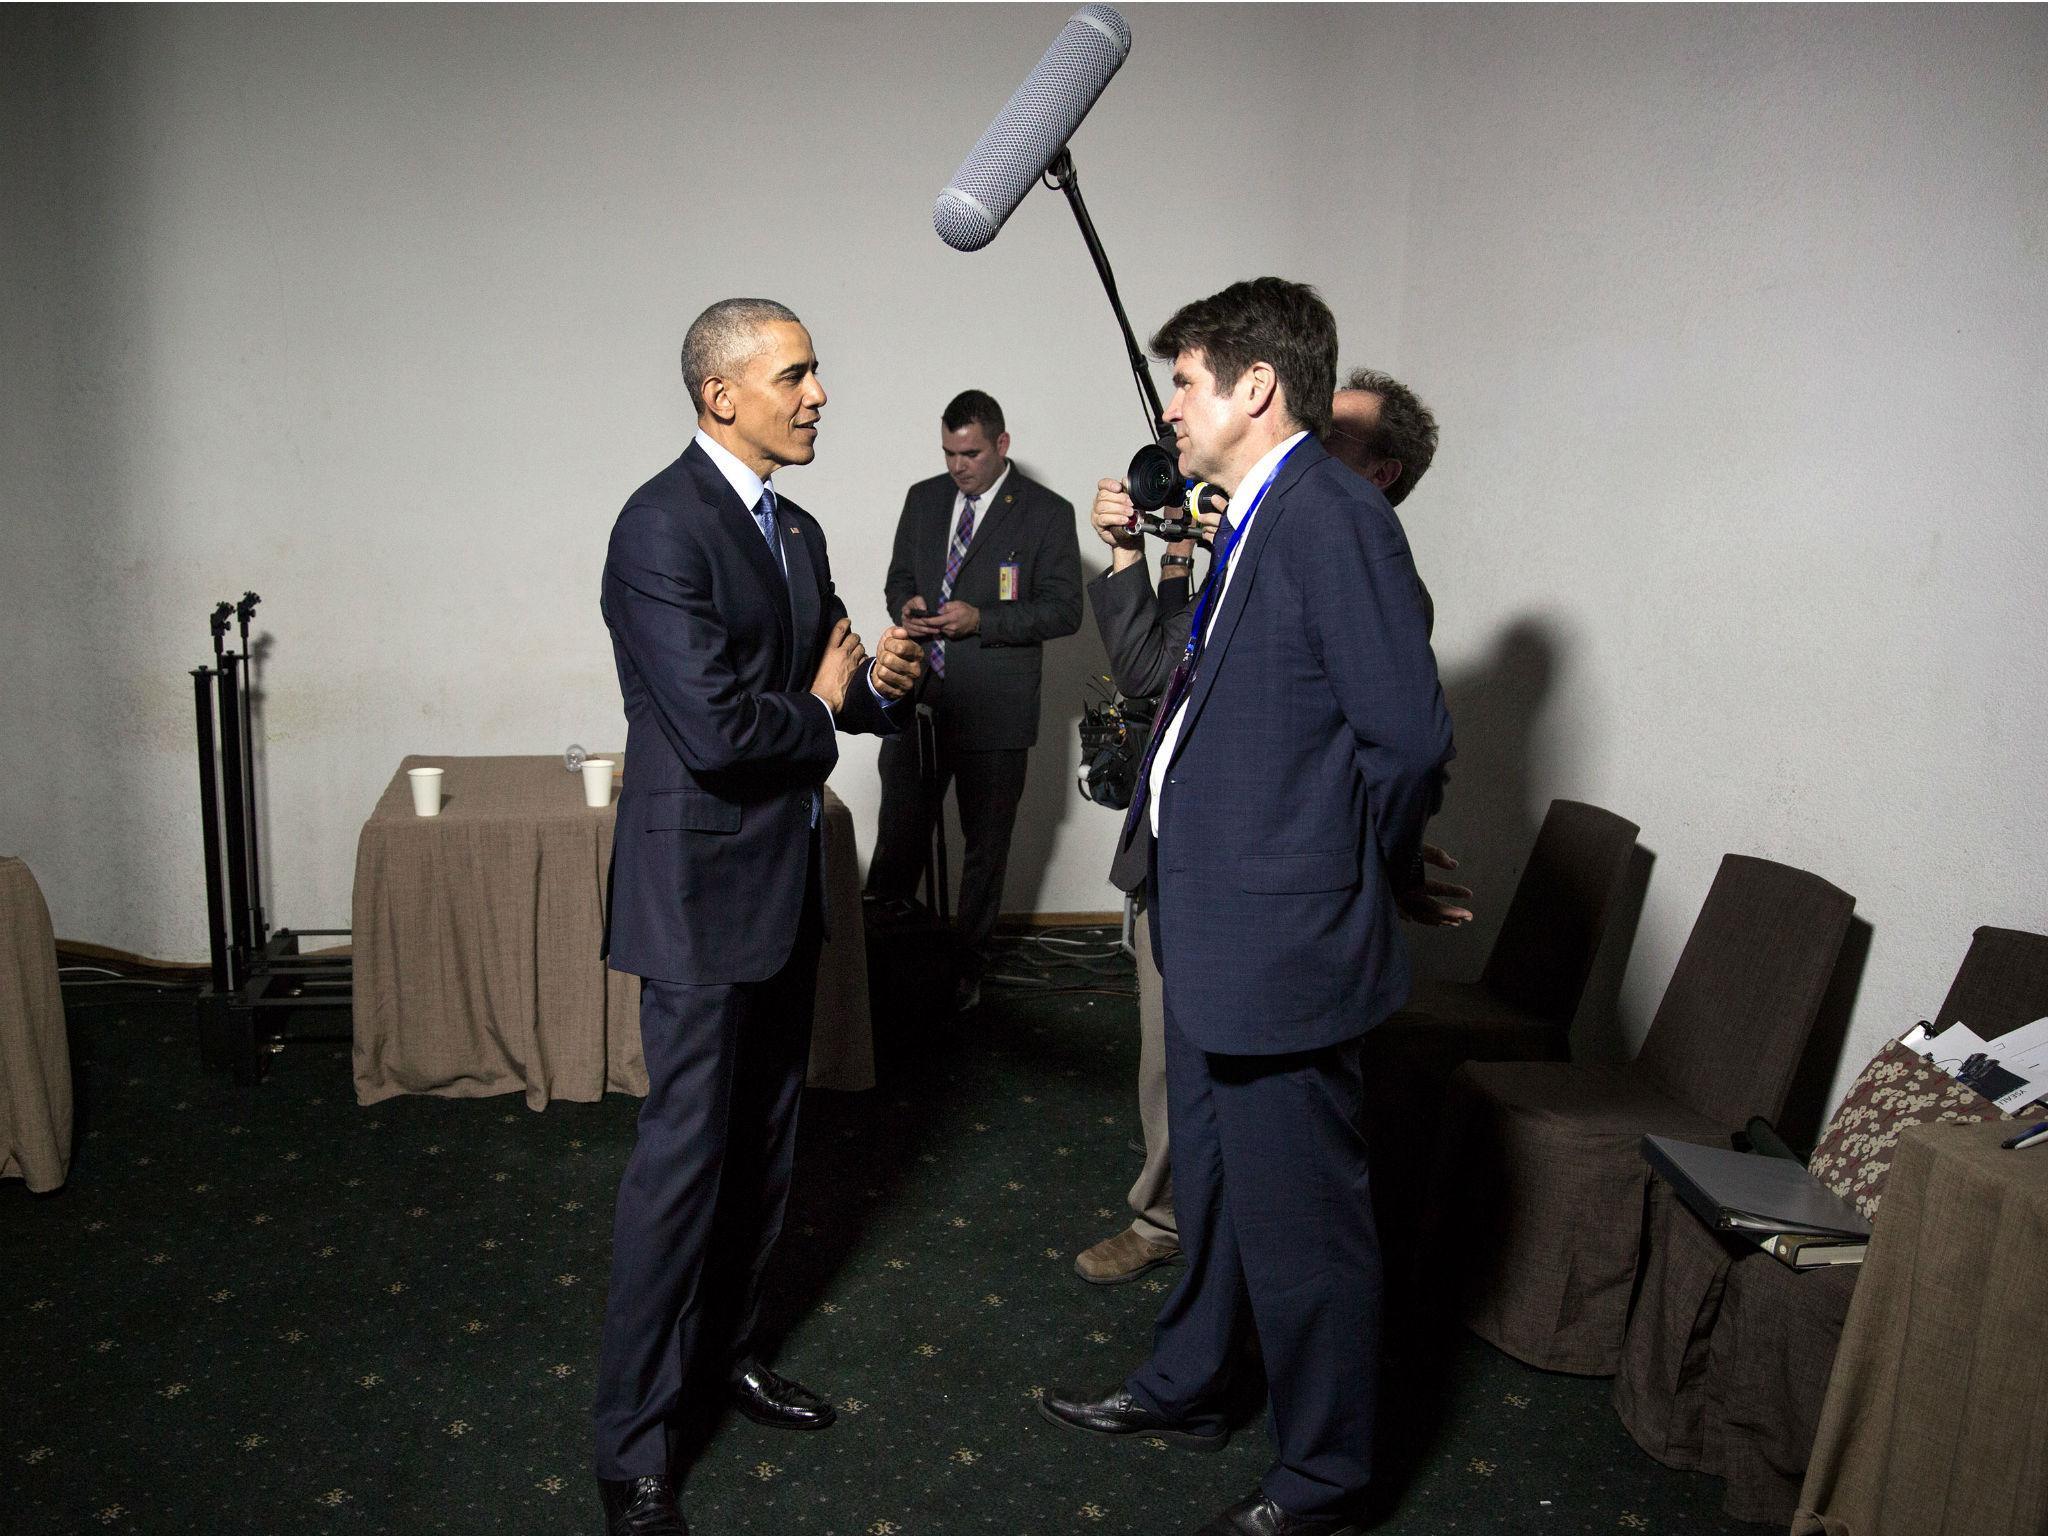 Barack Obama and the director Greg Barker, who filmed the former President and his team on over 20 foreign trips